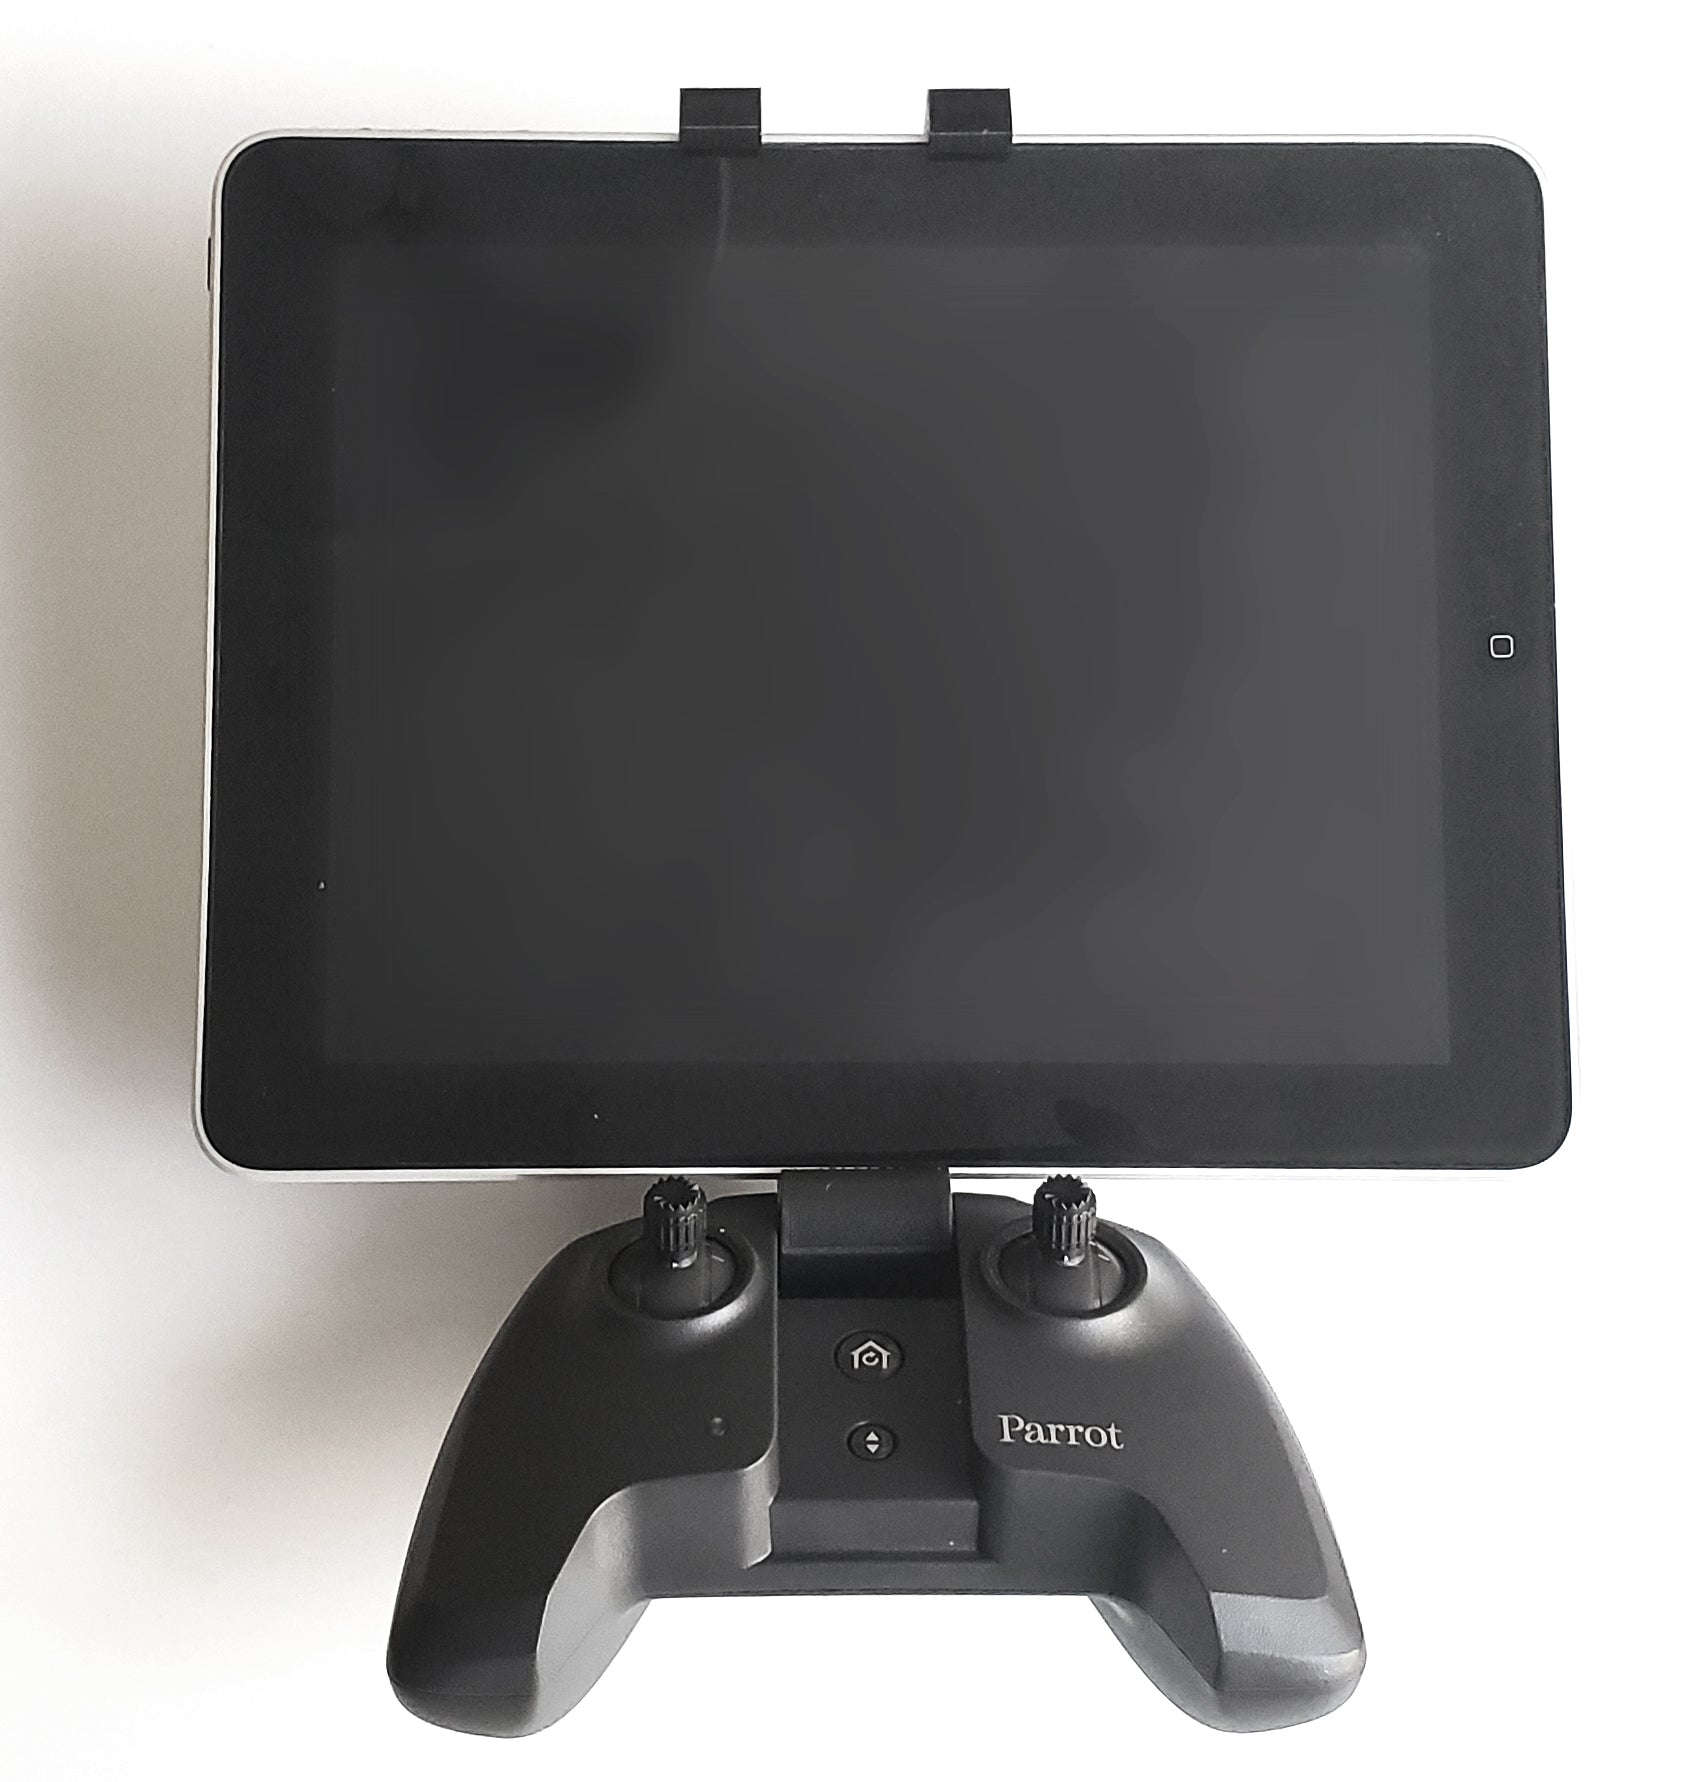 Parrot Anafi large tablet adapter mount by Dirty J Designs